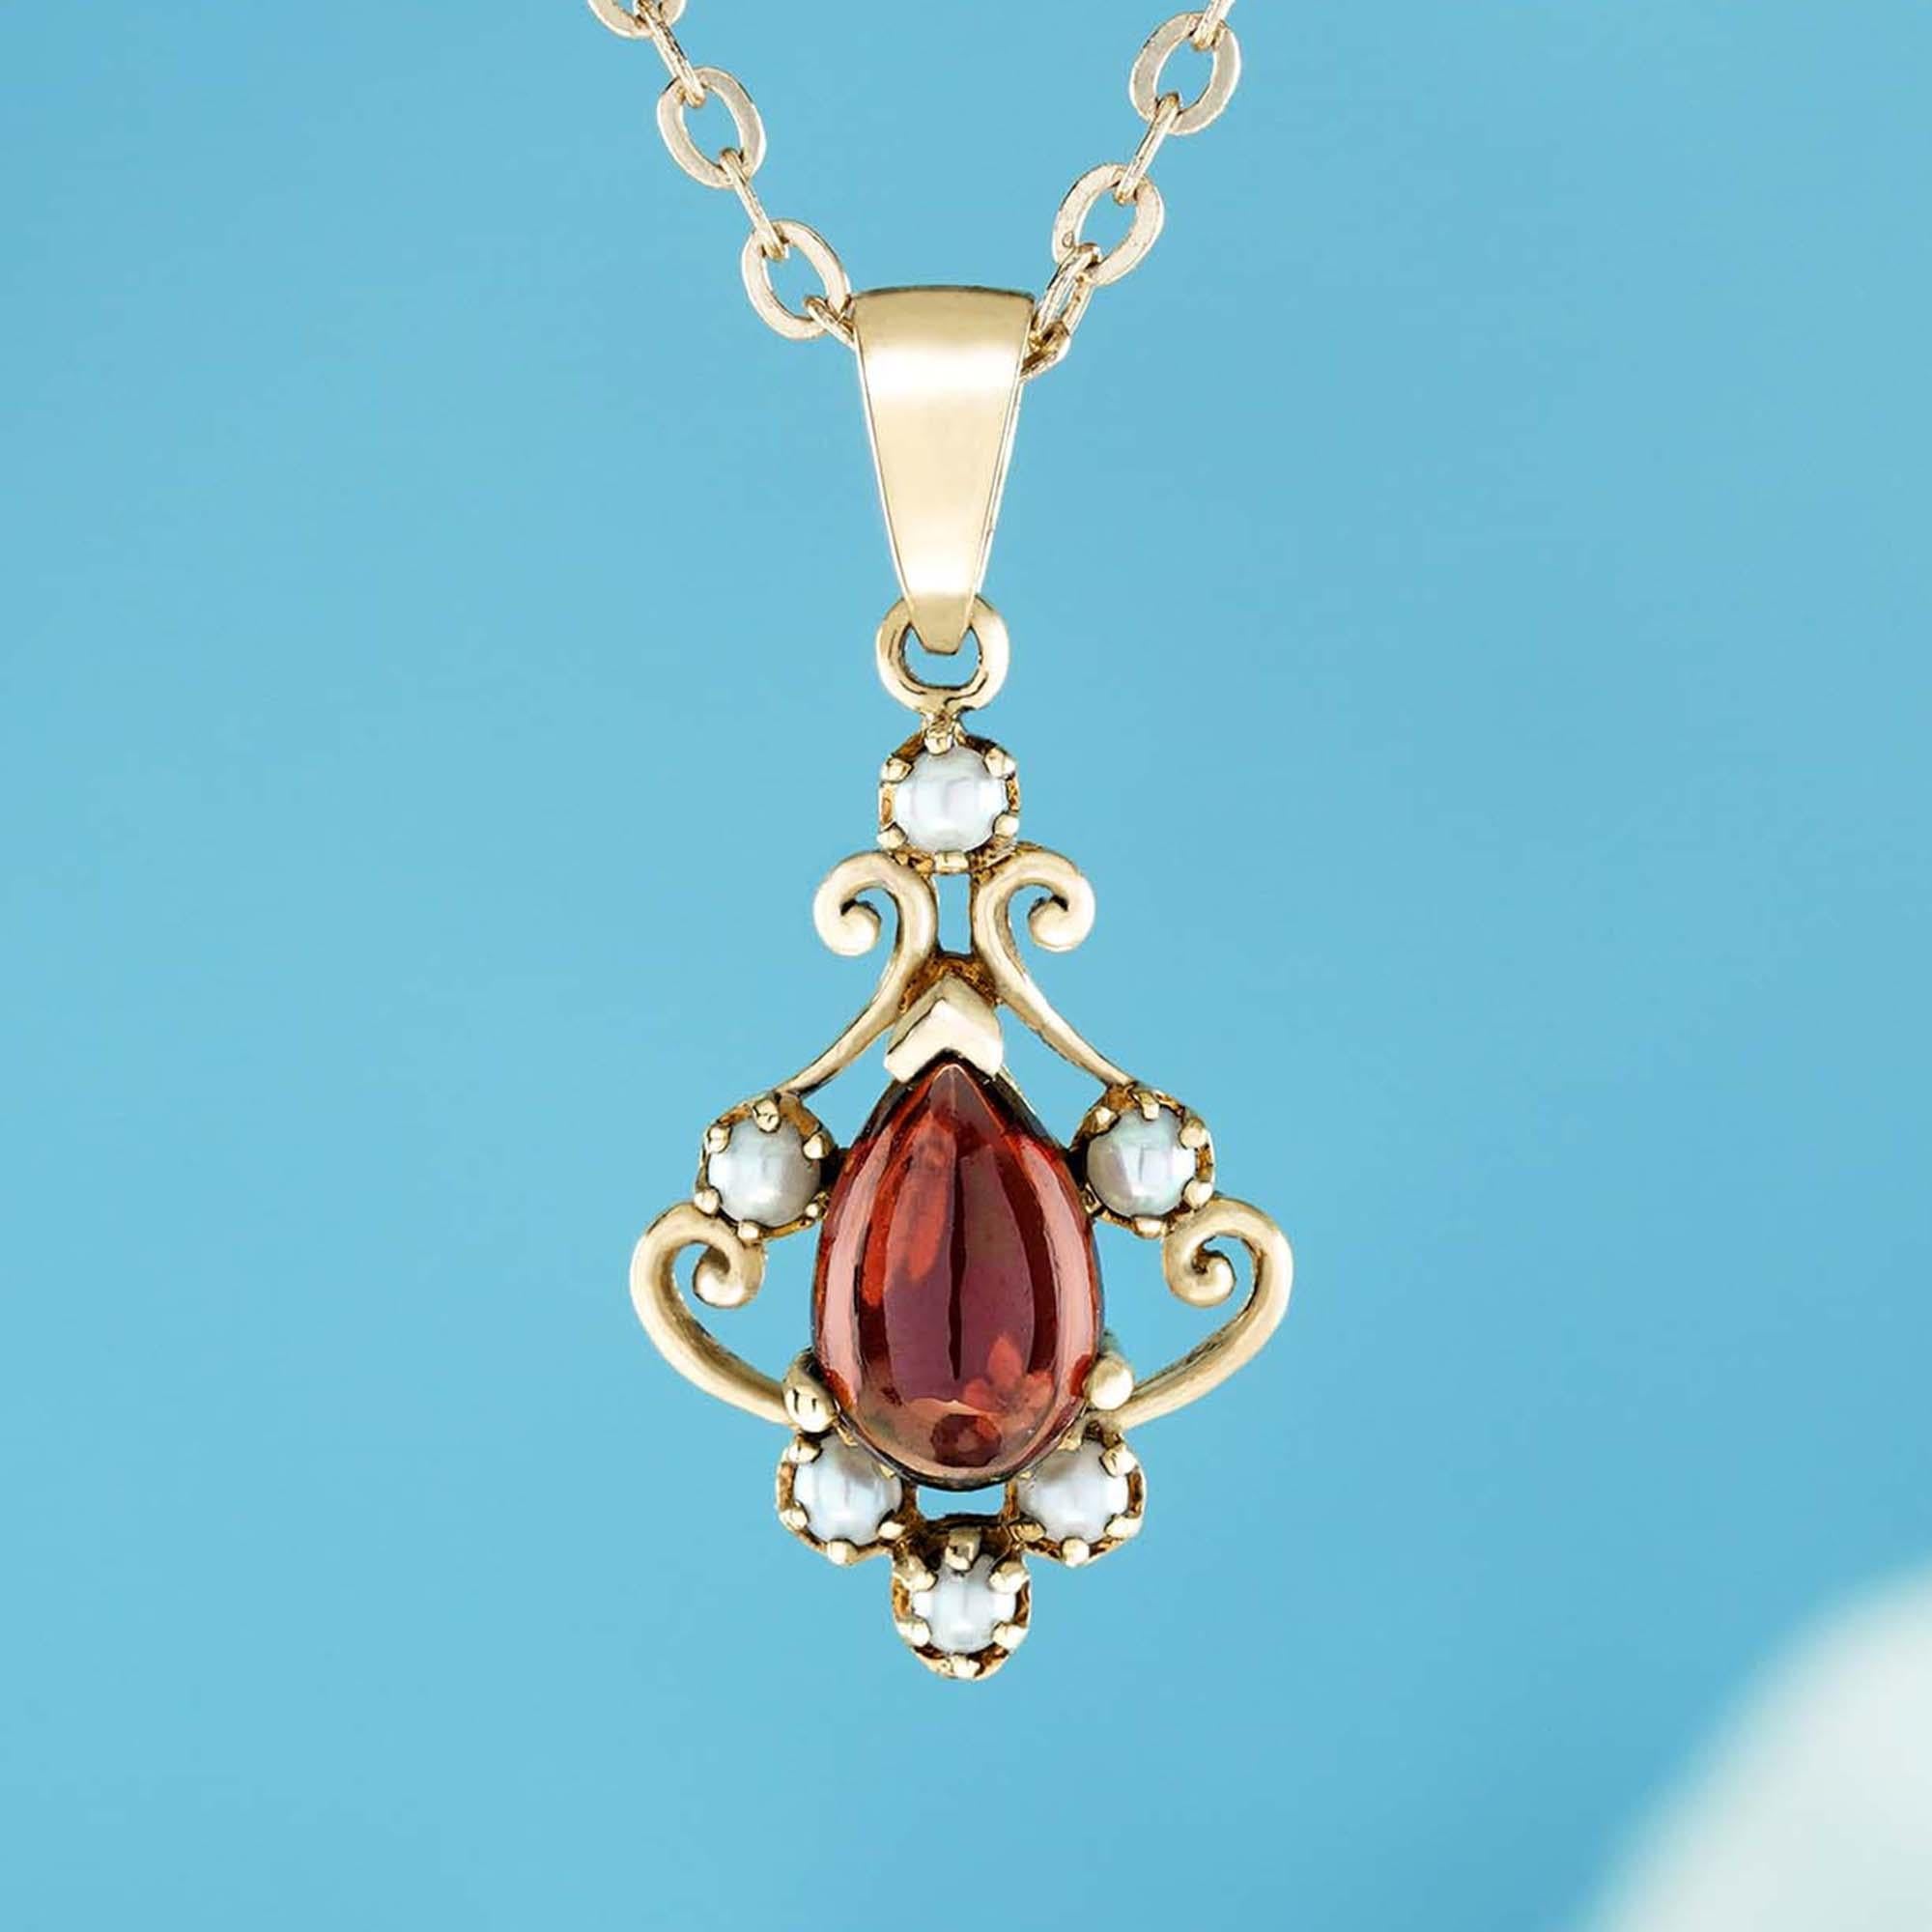 Add a delicate and unique aesthetic to your look with this pendant by GEMMA FILIGREE. Our antique design gold pendant equate to delicacy and light openwork, while maintains strength for everyday wear for a lifetime.

CHARACTERISTICS
Status: Made to